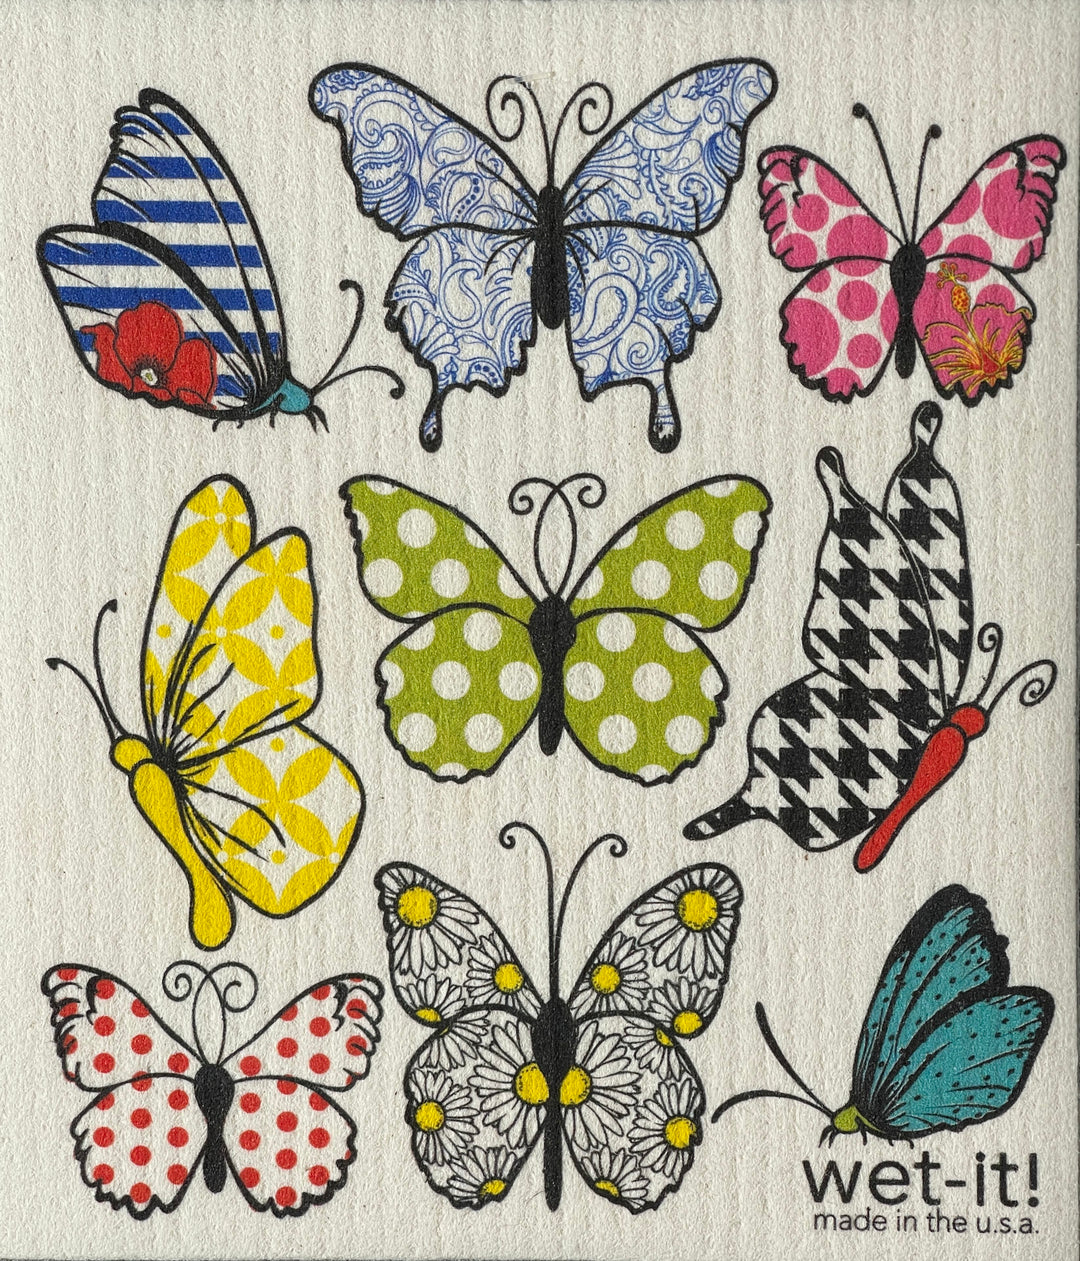 Wet It! Swedish Cloth - Lively Butterflies